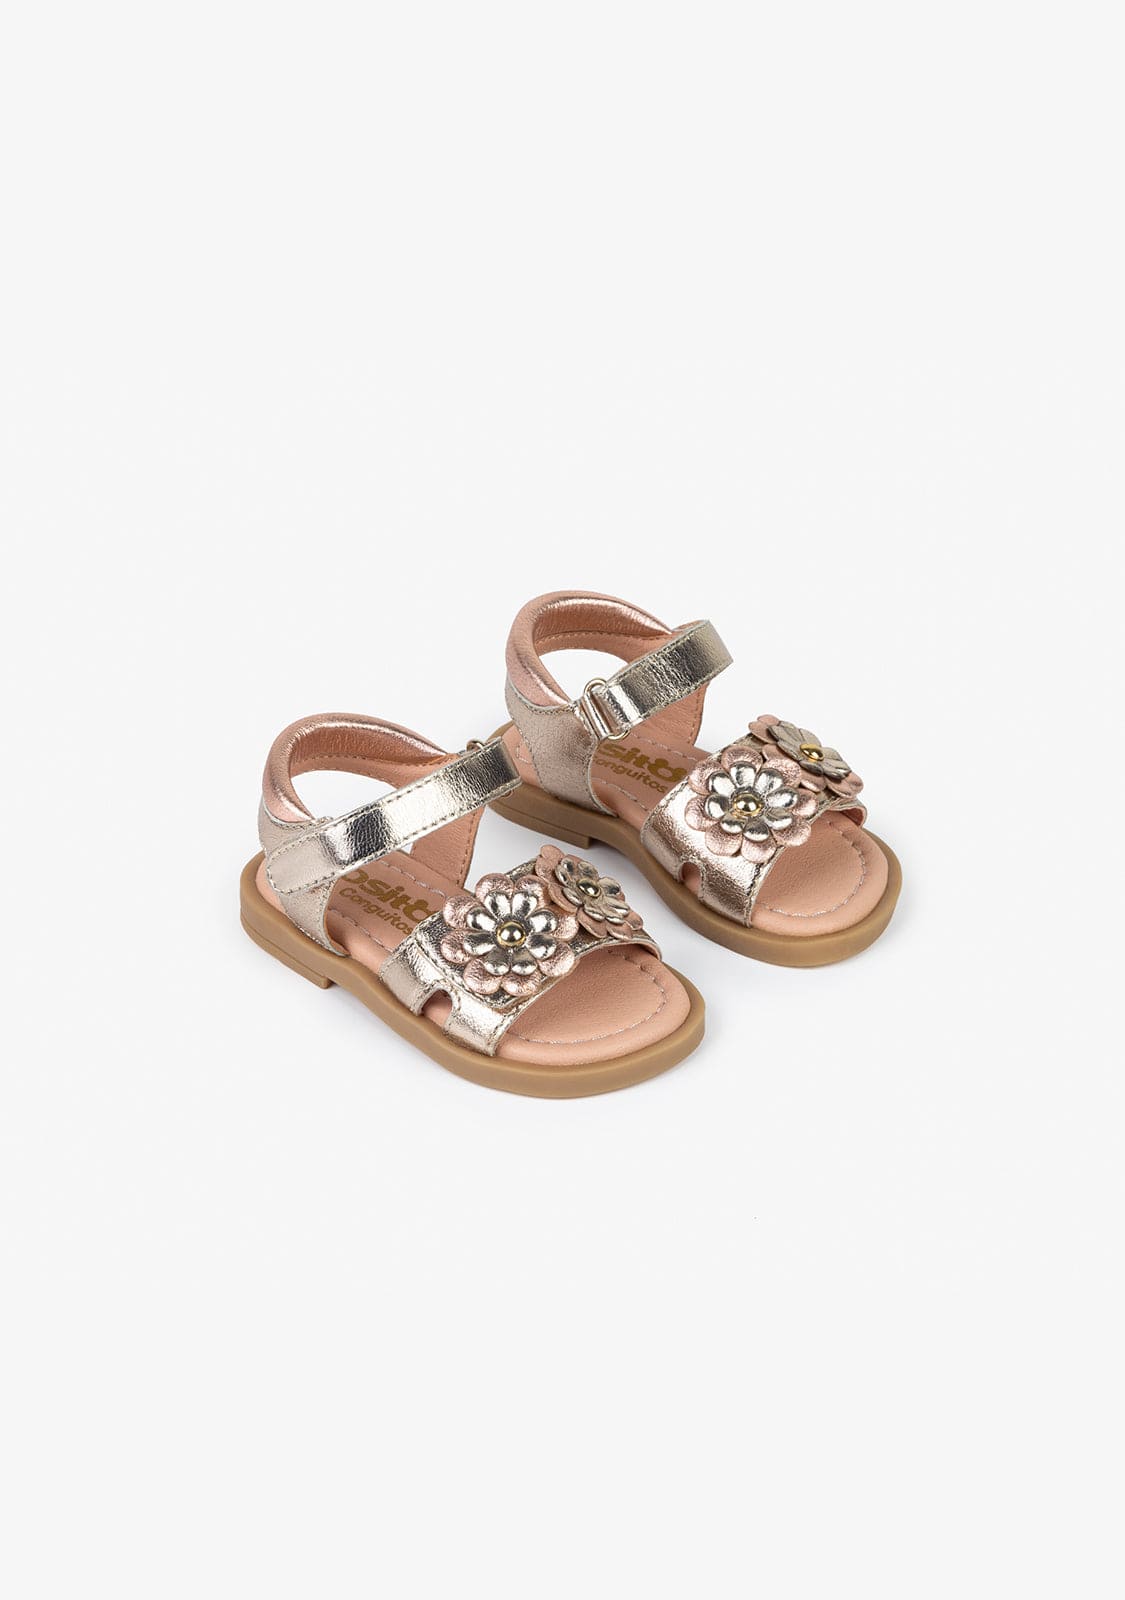 OSITO Shoes Baby's Flowers Metallic Leather Sandals